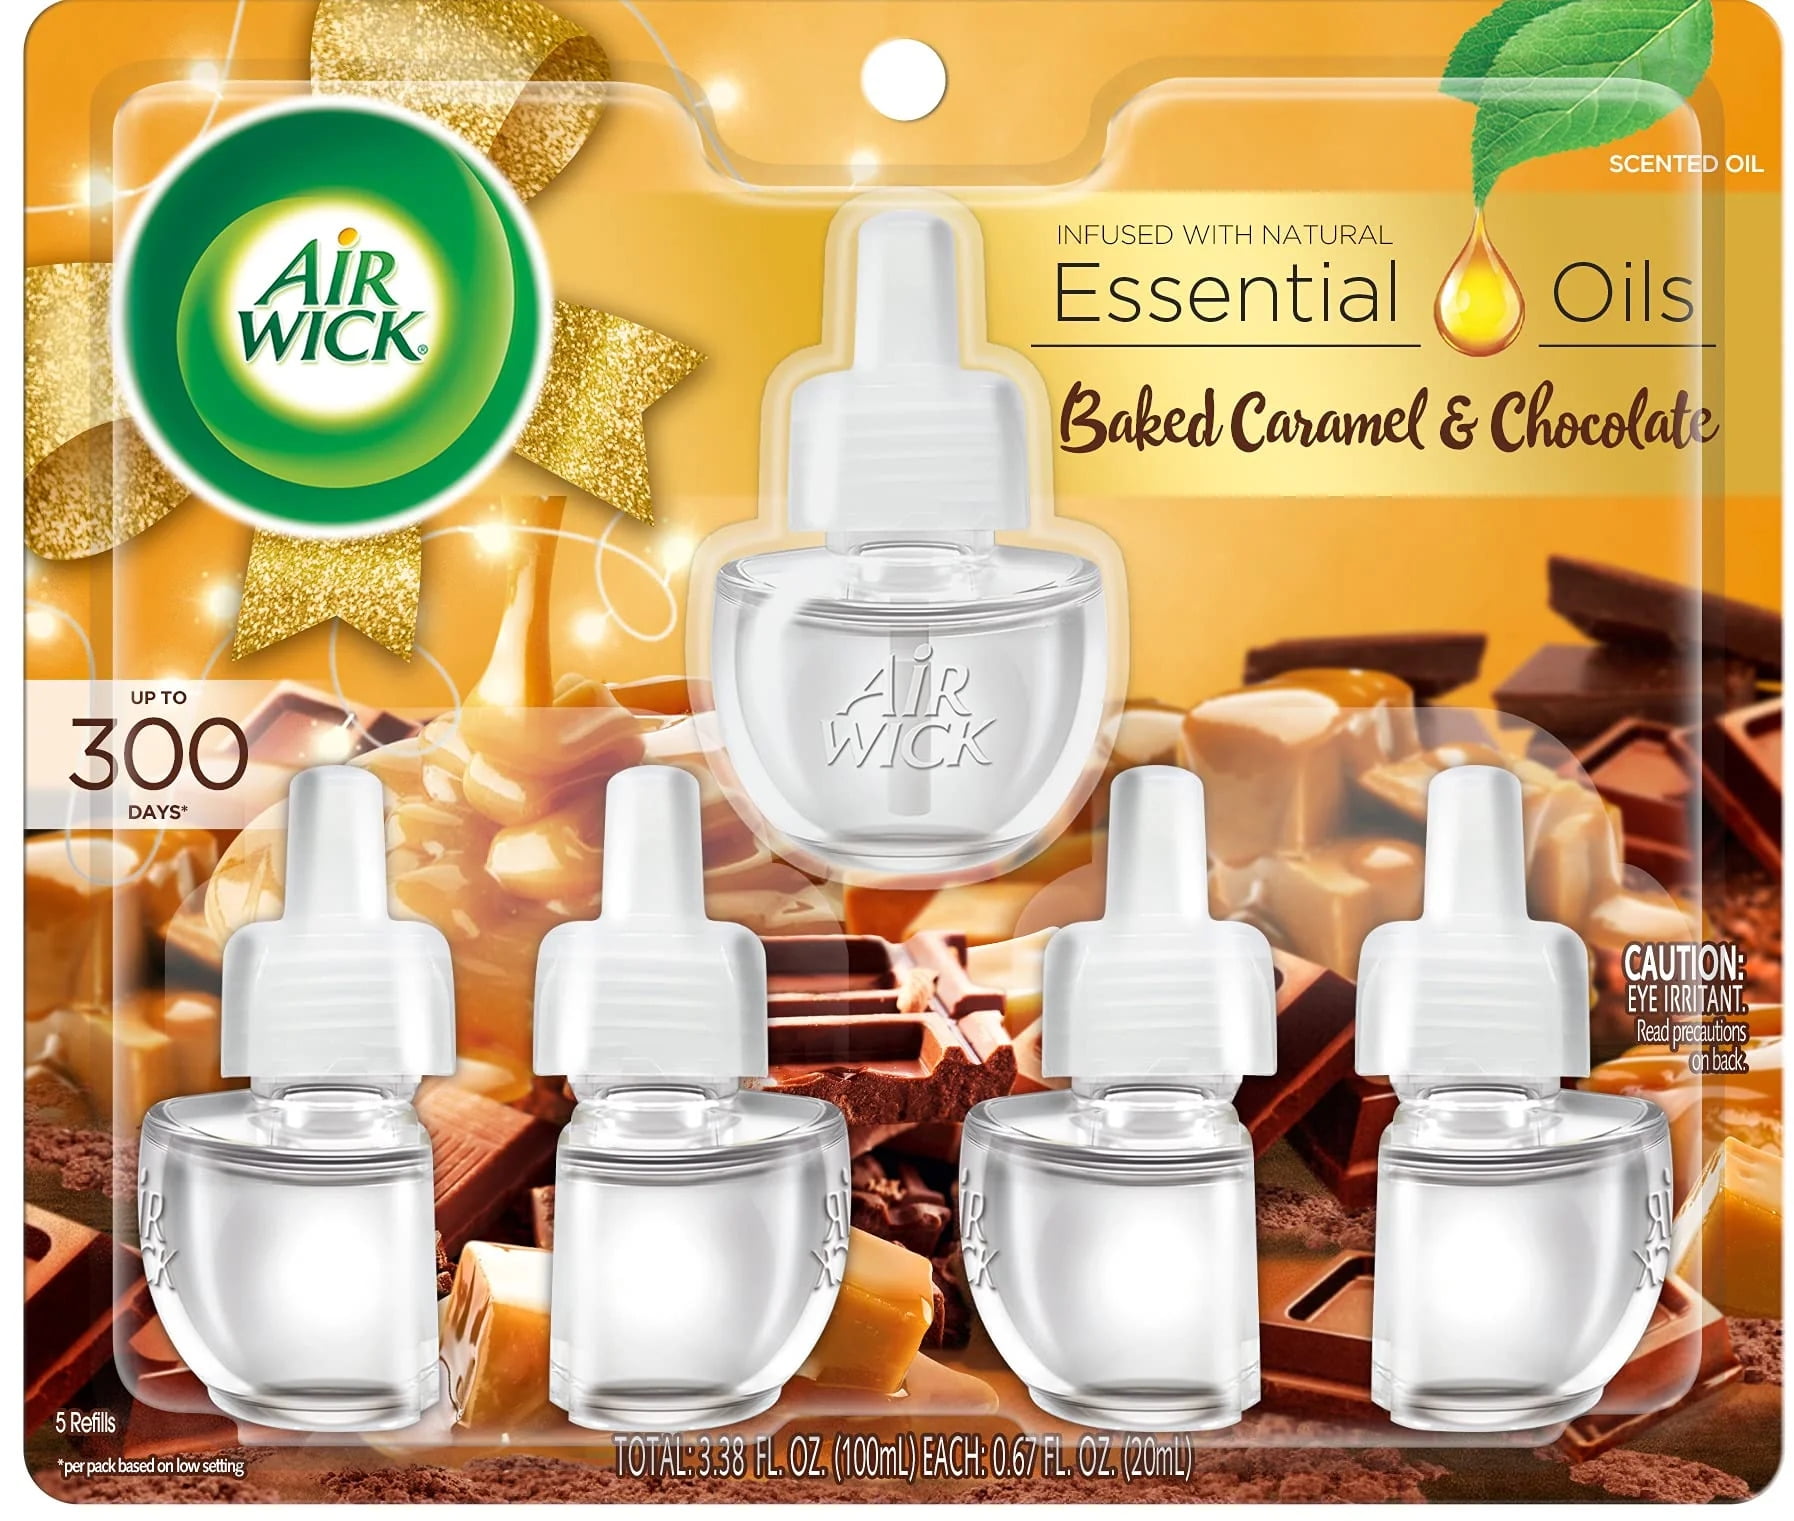 Air Wick Plug in Scented Oil 5 Refills, Baked Caramel & Chocolate,  Essential Oils, Air Freshener Fall Scent, Fall décor 